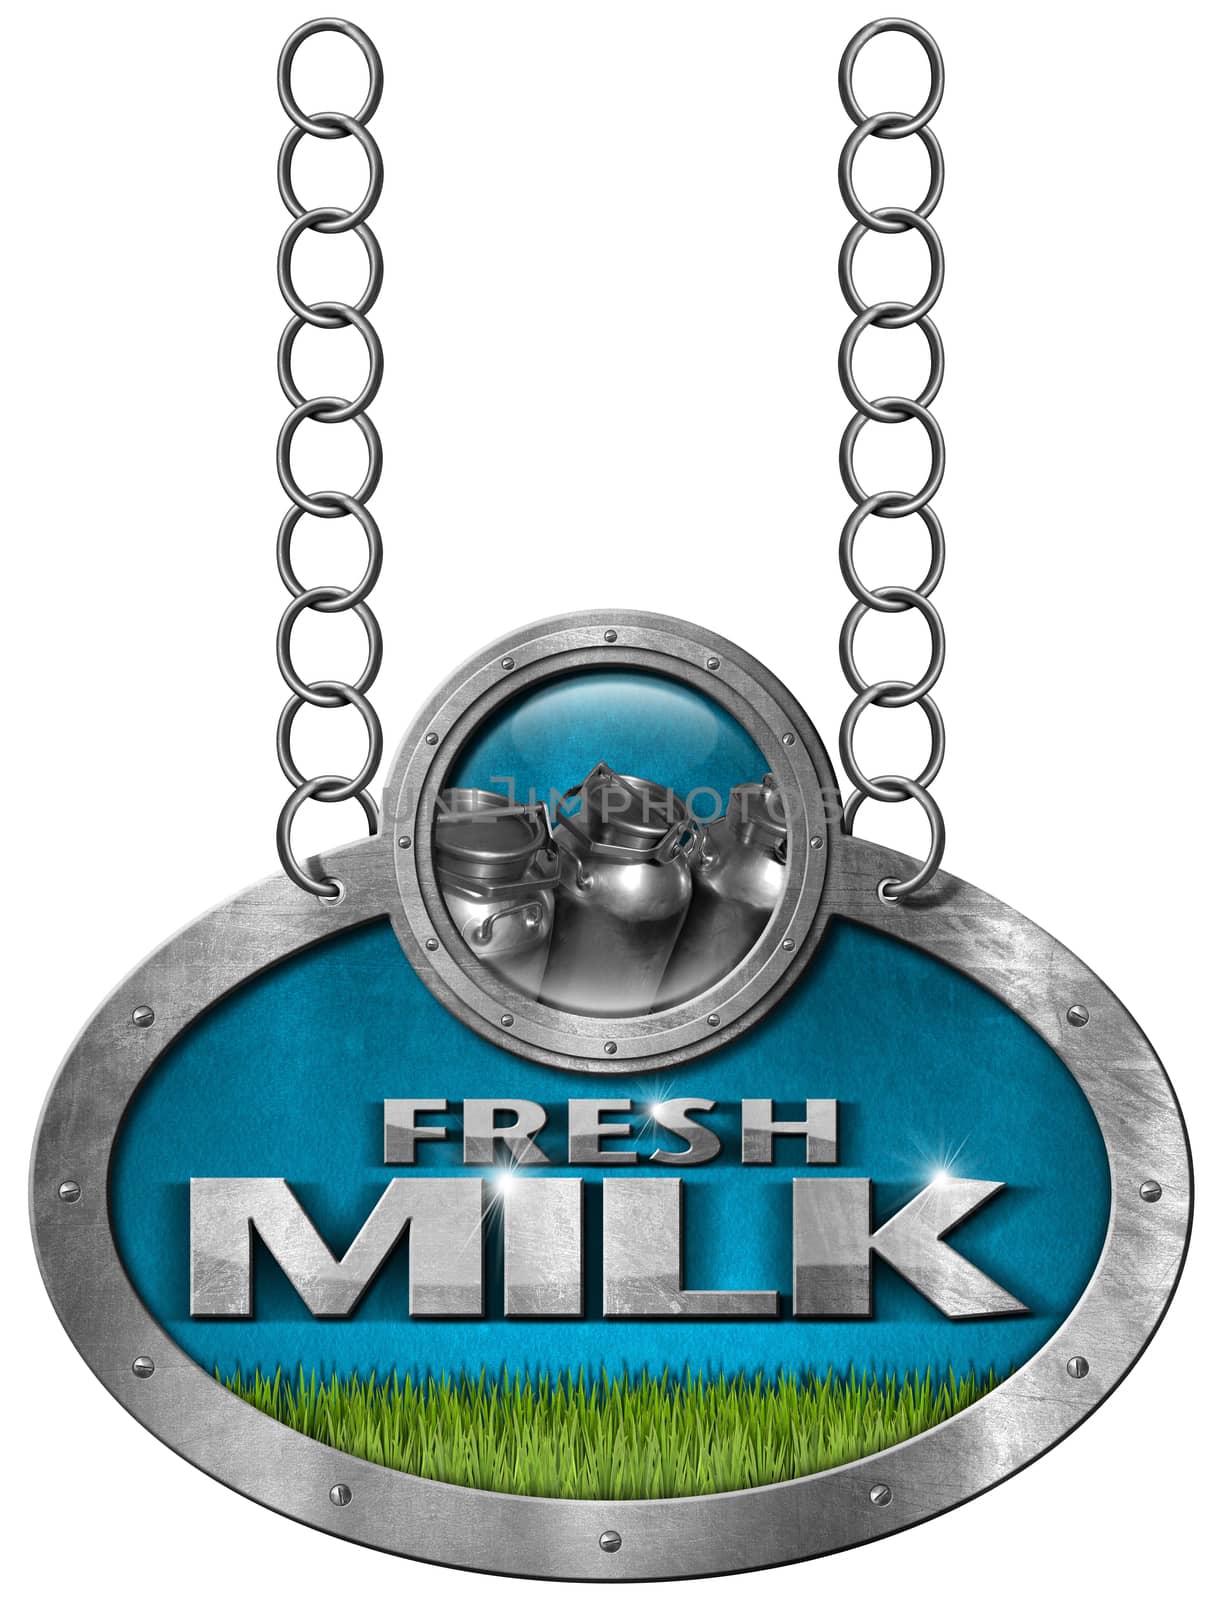 Metallic sign with text Fresh milk, steel cans for the transport of milk and a green grass. Hanging from a metal chain and isolated on white background